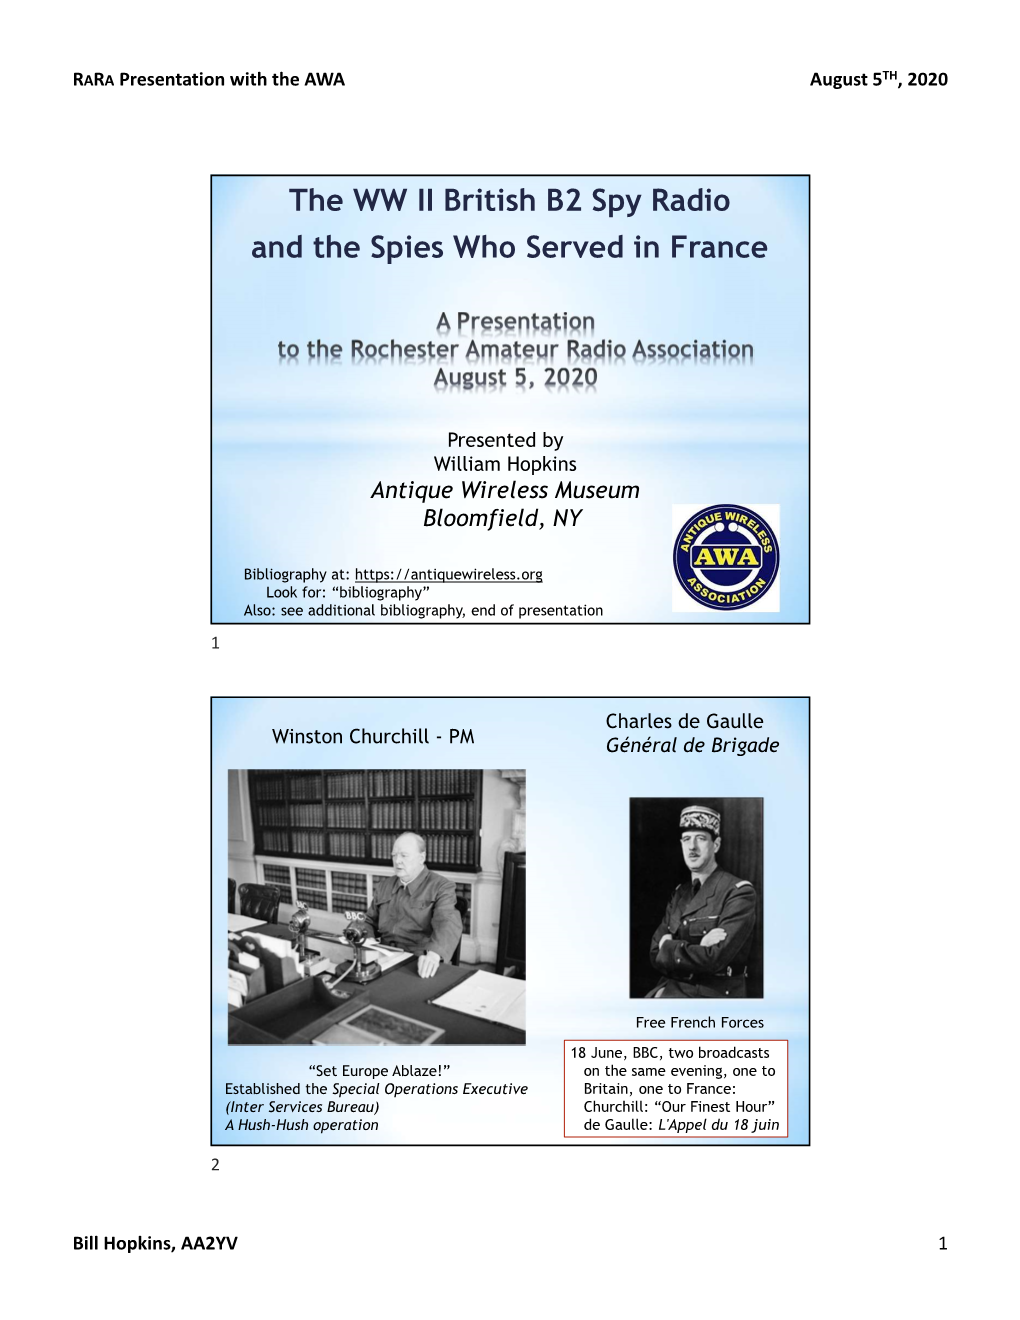 The WW II British B2 Spy Radio and the Spies Who Served in France